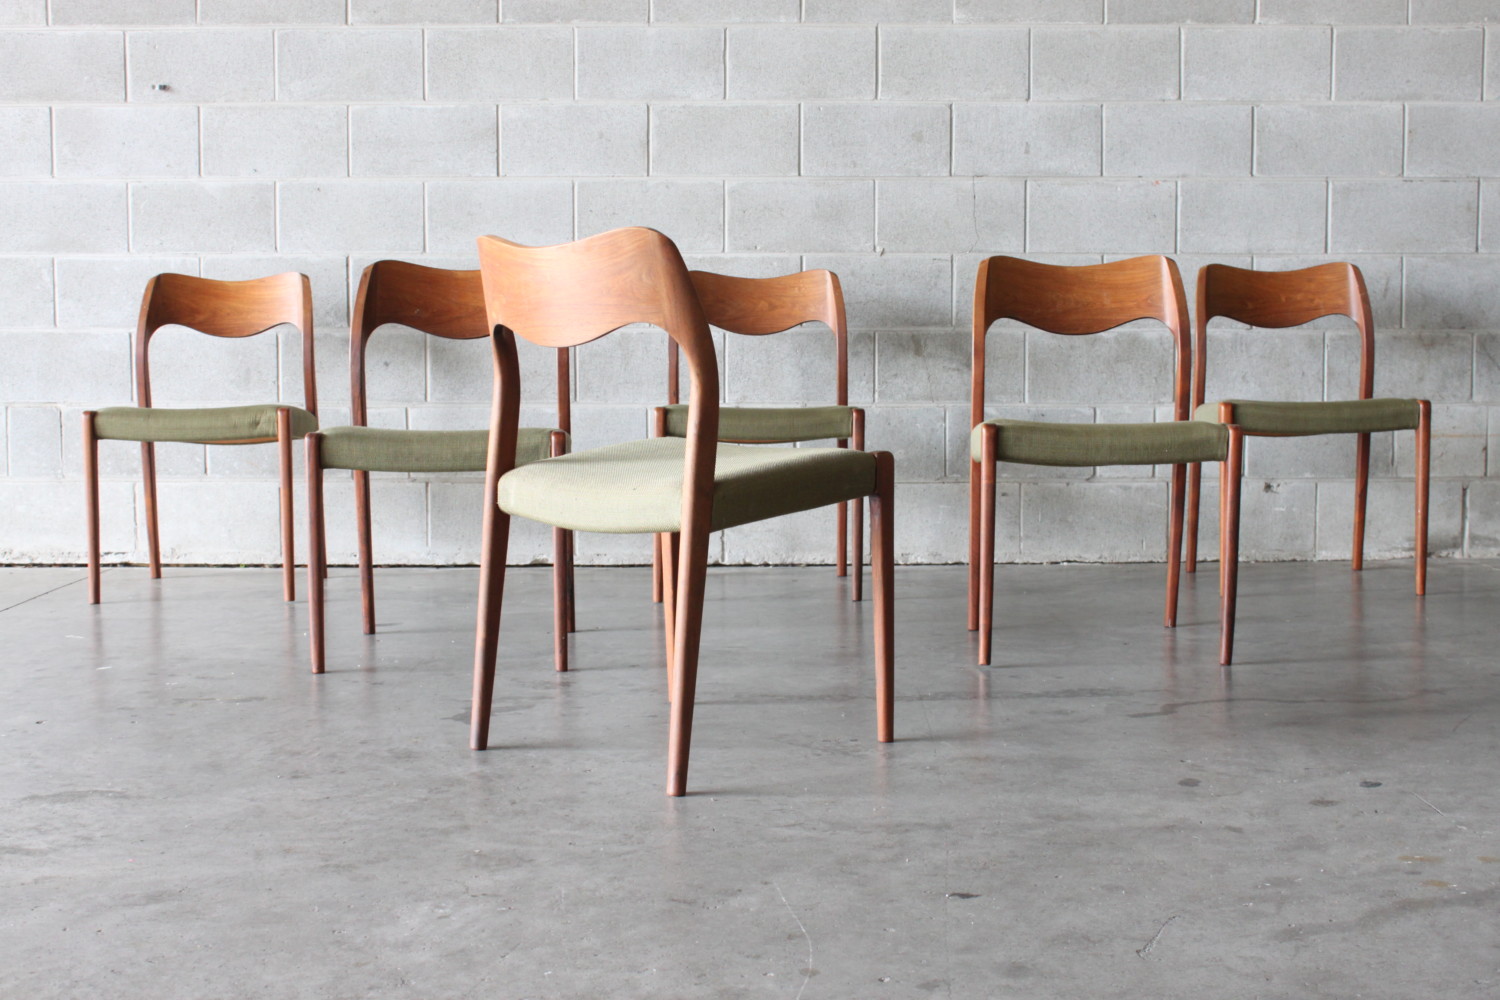 Dining Chairs by Niels Moller #71 Sold